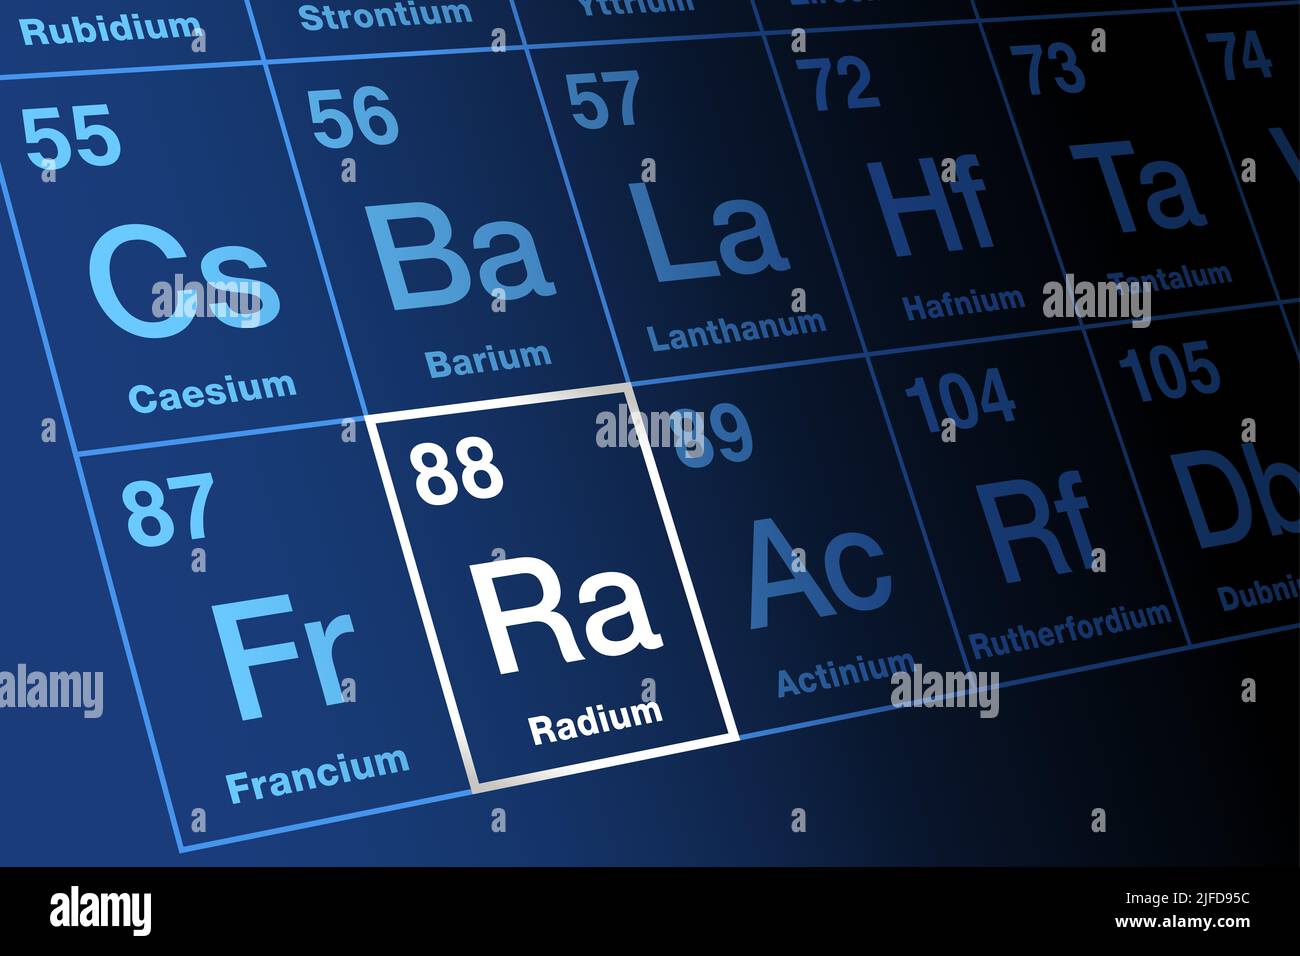 Radium, on the periodic table of the elements. Radioactive alkaline earth metal, with symbol Ra and atomic number 88. Decays into radon gas. Stock Photo